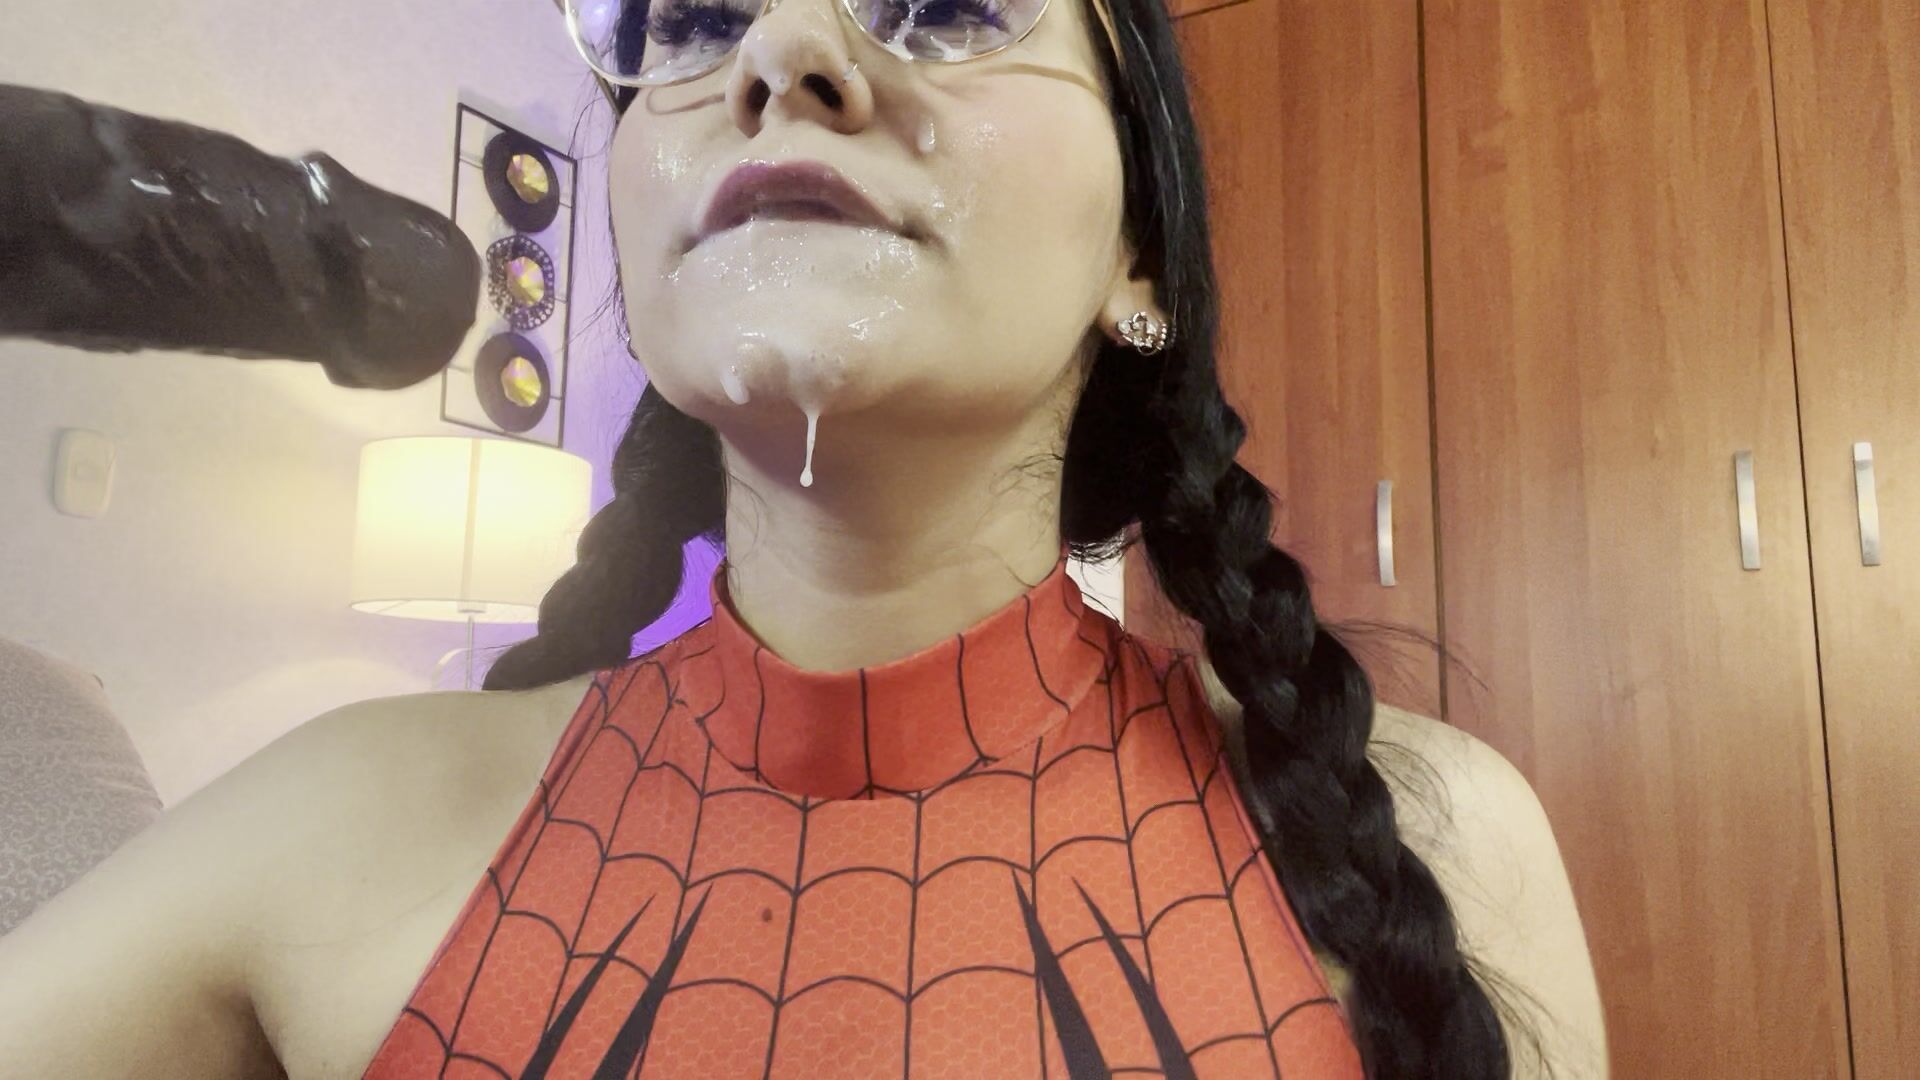 This spider woman took out all your milk and you did it on my face whit glasses